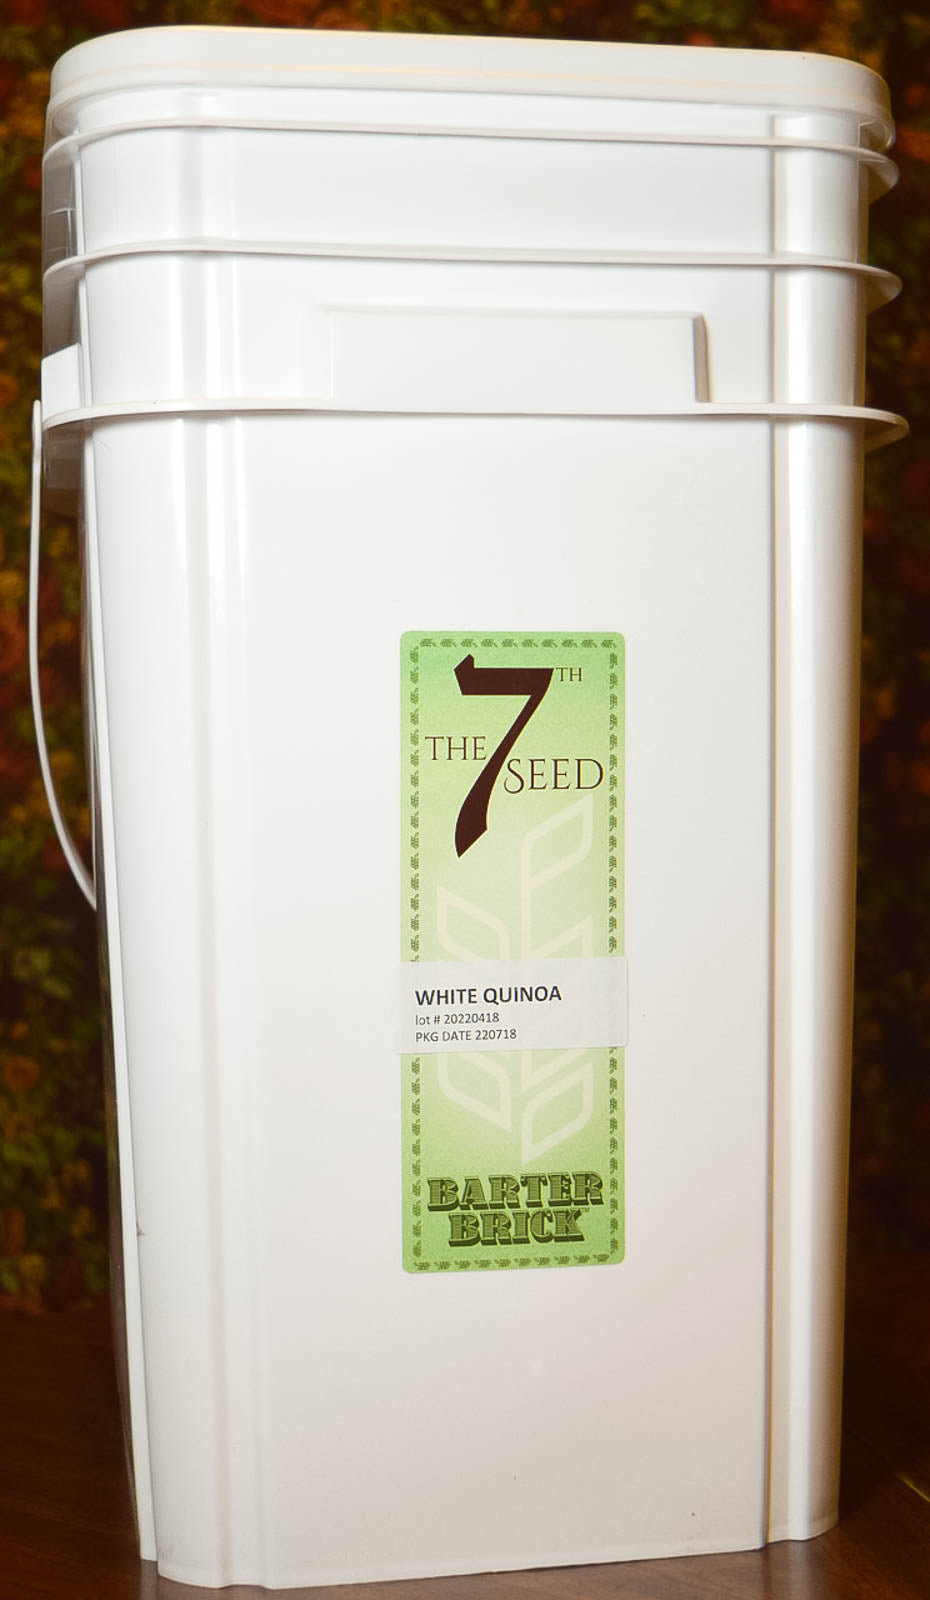 SPECIAL CLEARANCE - White Quinoa 35lb Bucket